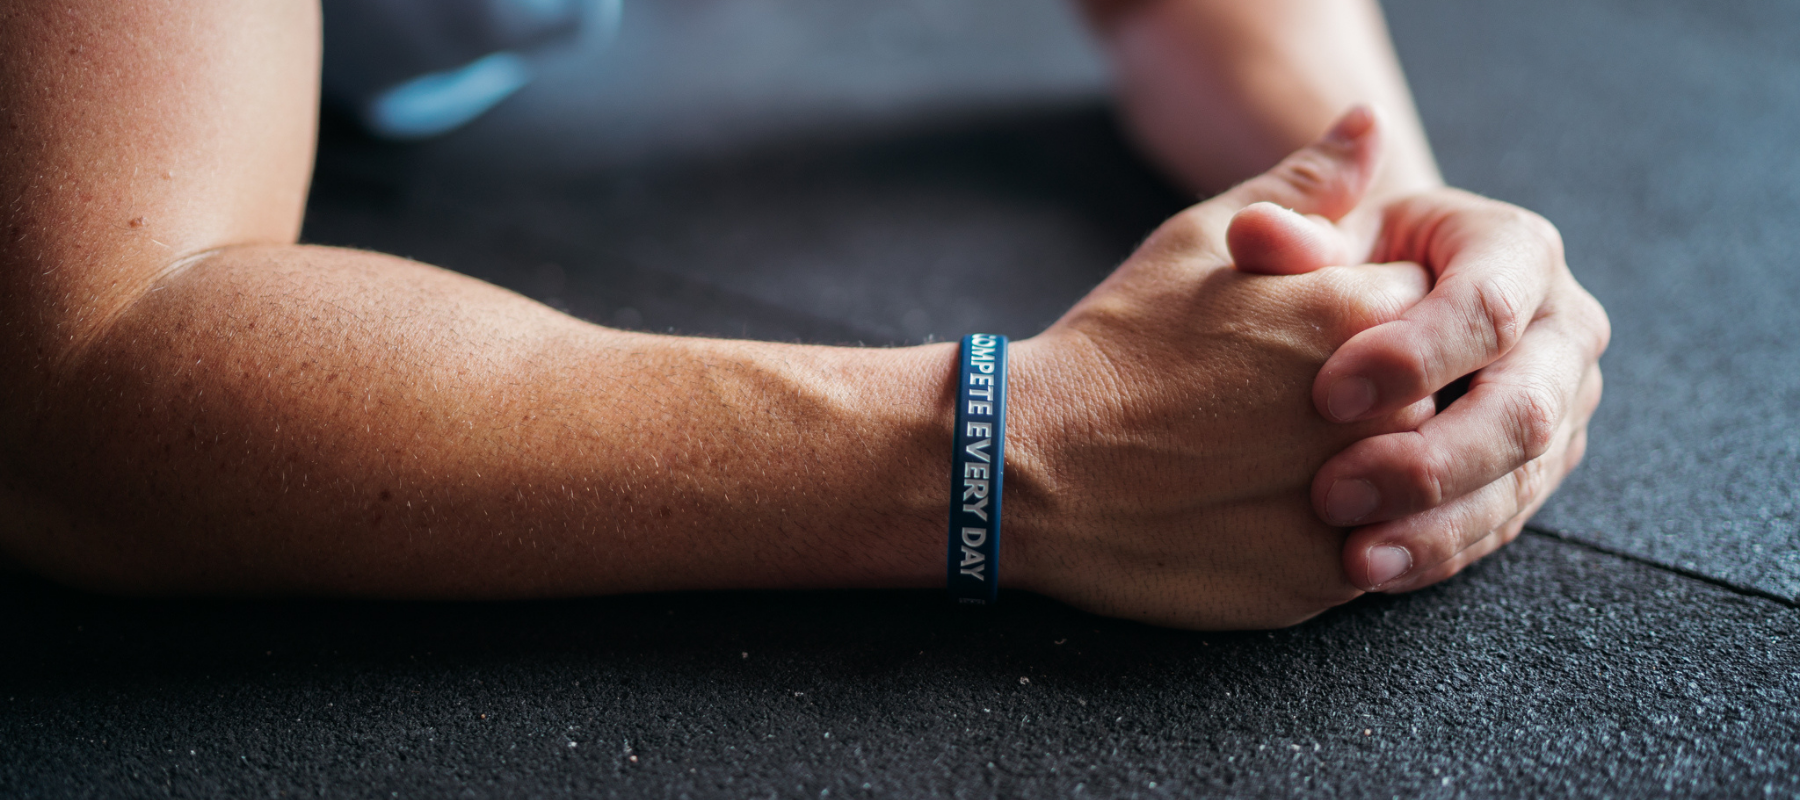 Compete Every day wristband